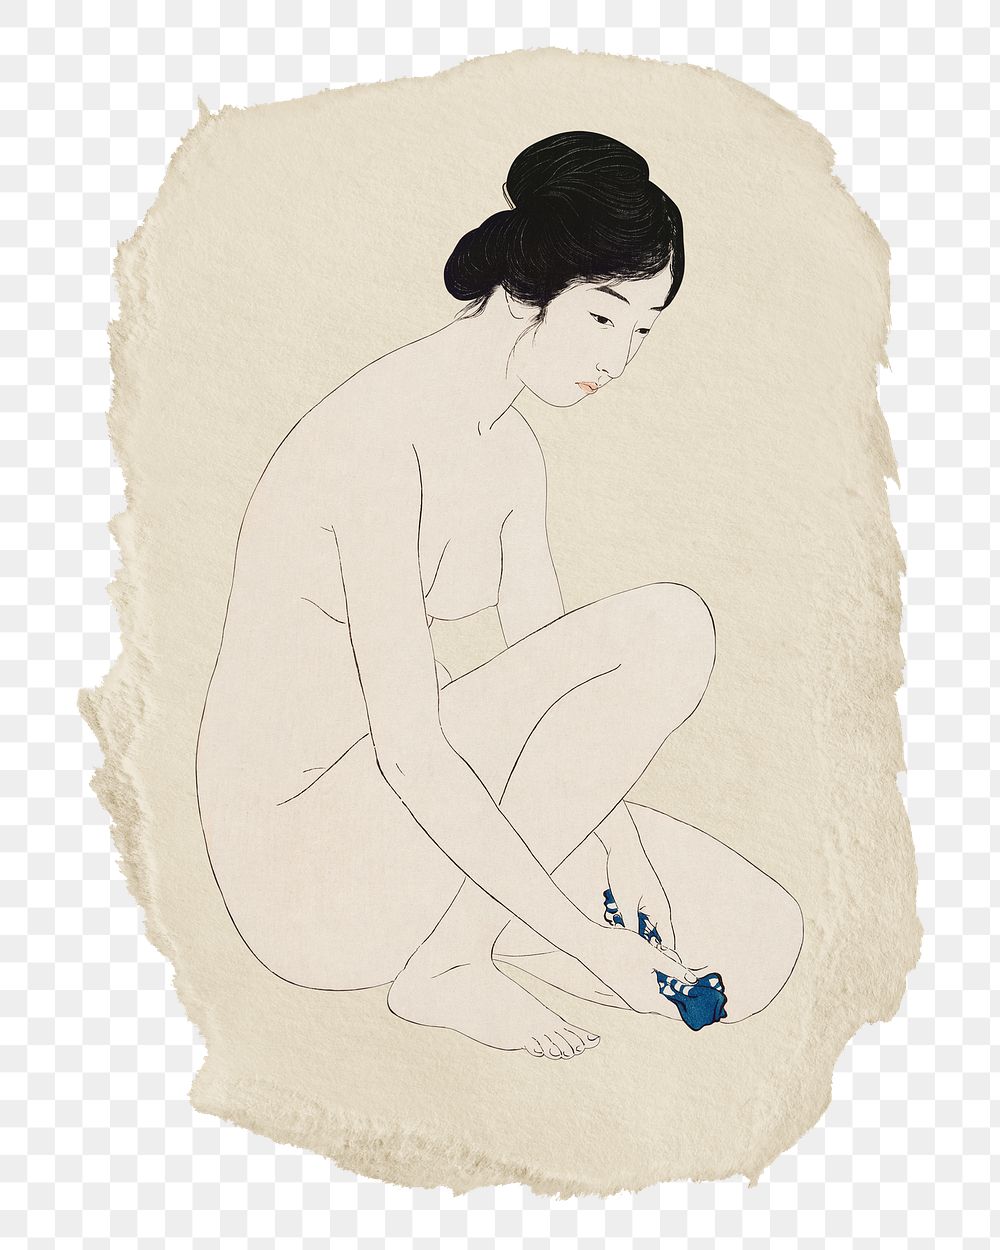 Png Hashiguchi's naked woman sticker, vintage illustration on ripped paper, transparent background